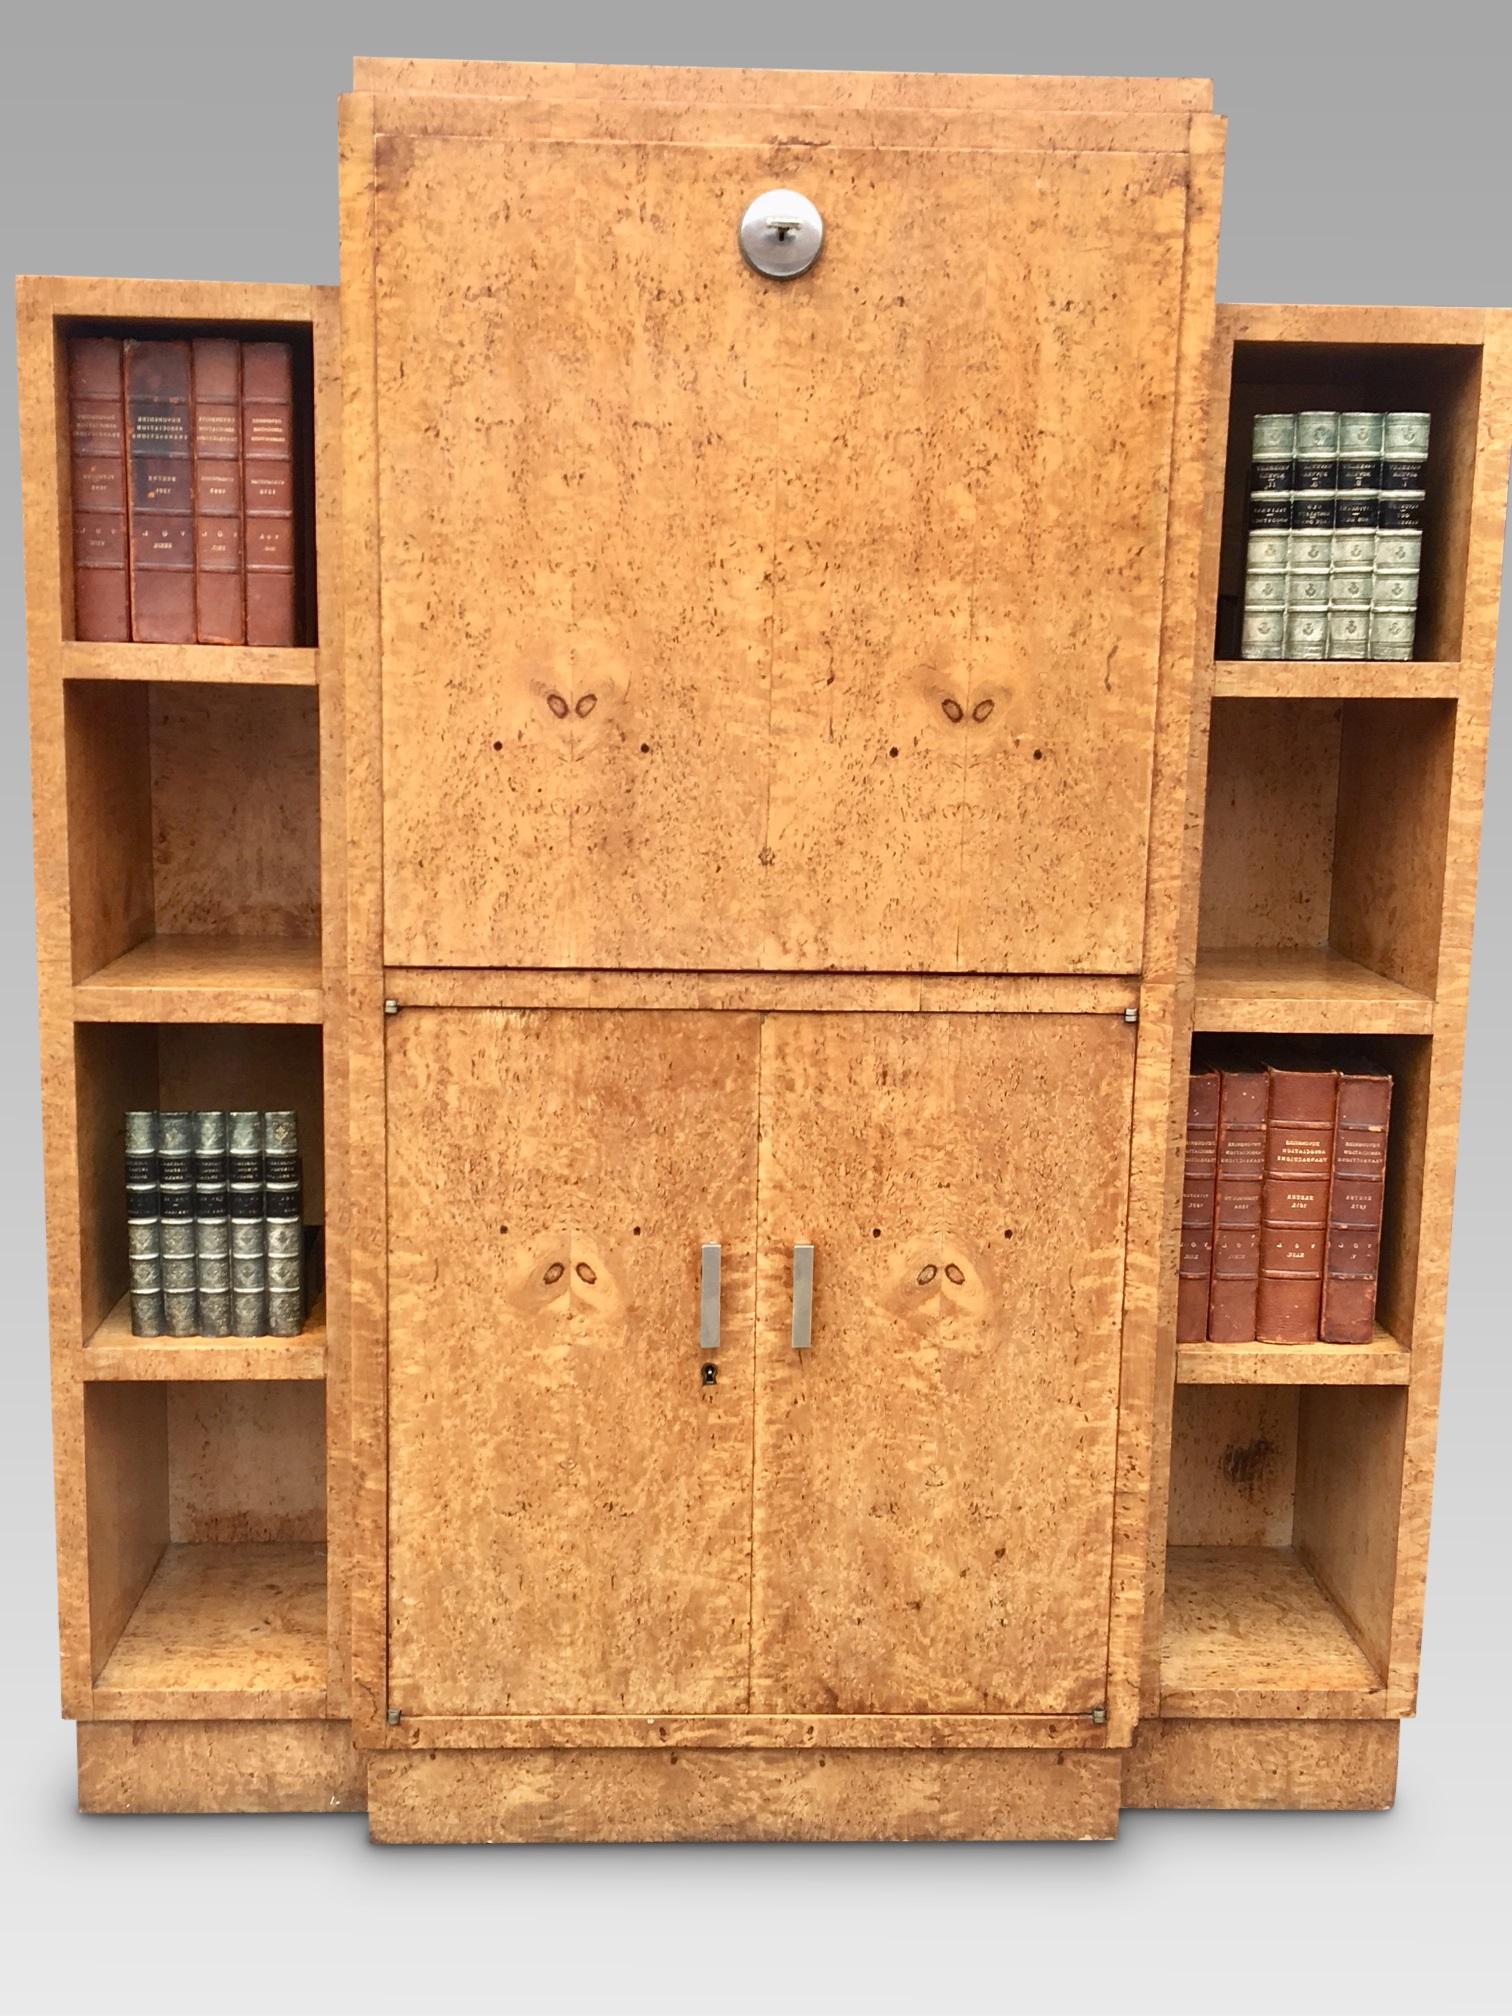 This fine quality secretaire bookcase is French and dates from the 1930s. Veneered in Burr Maple and made with an exceptional quality of craftsmanship, it fits perfectly into todays' desire for lighter and more decorative pieces of furniture.

The